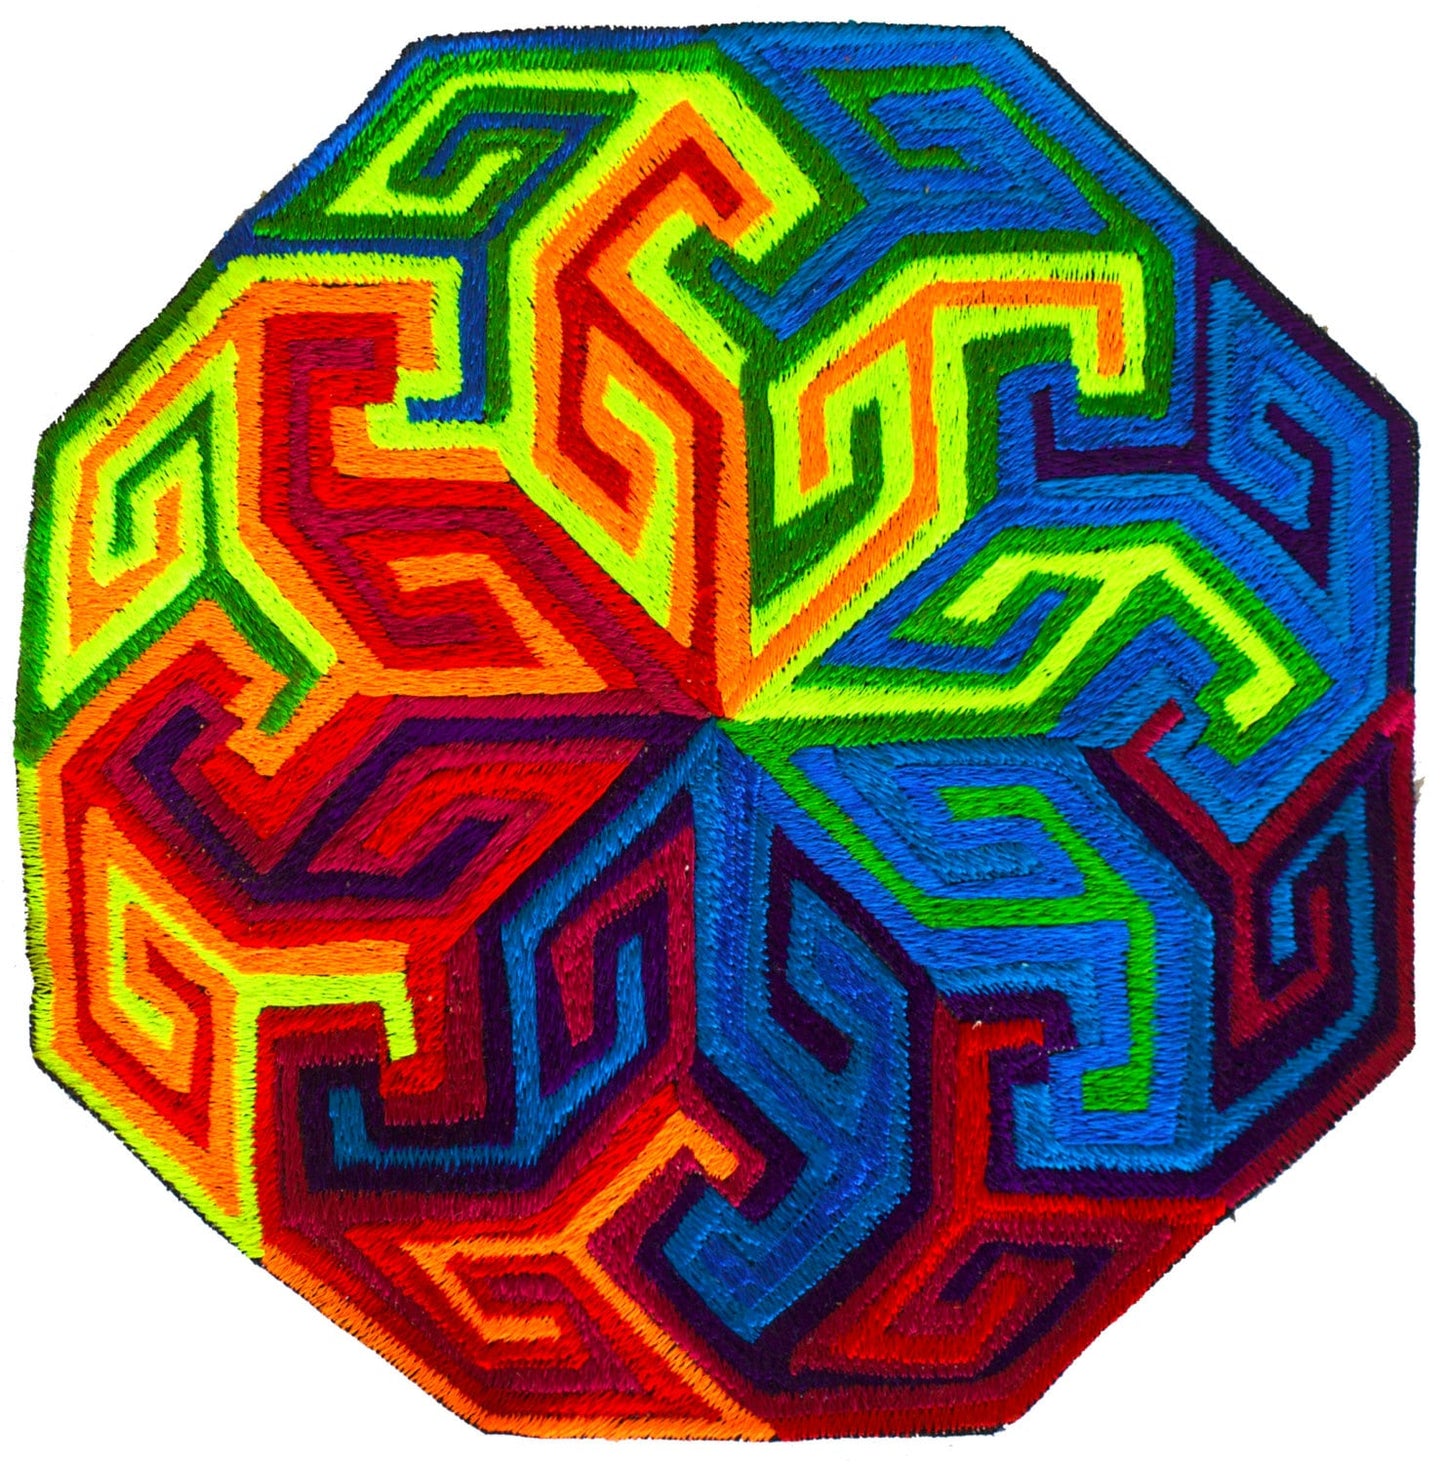 Rainbow Swastica Mandala - psychedelic 7 inch embroidery patch